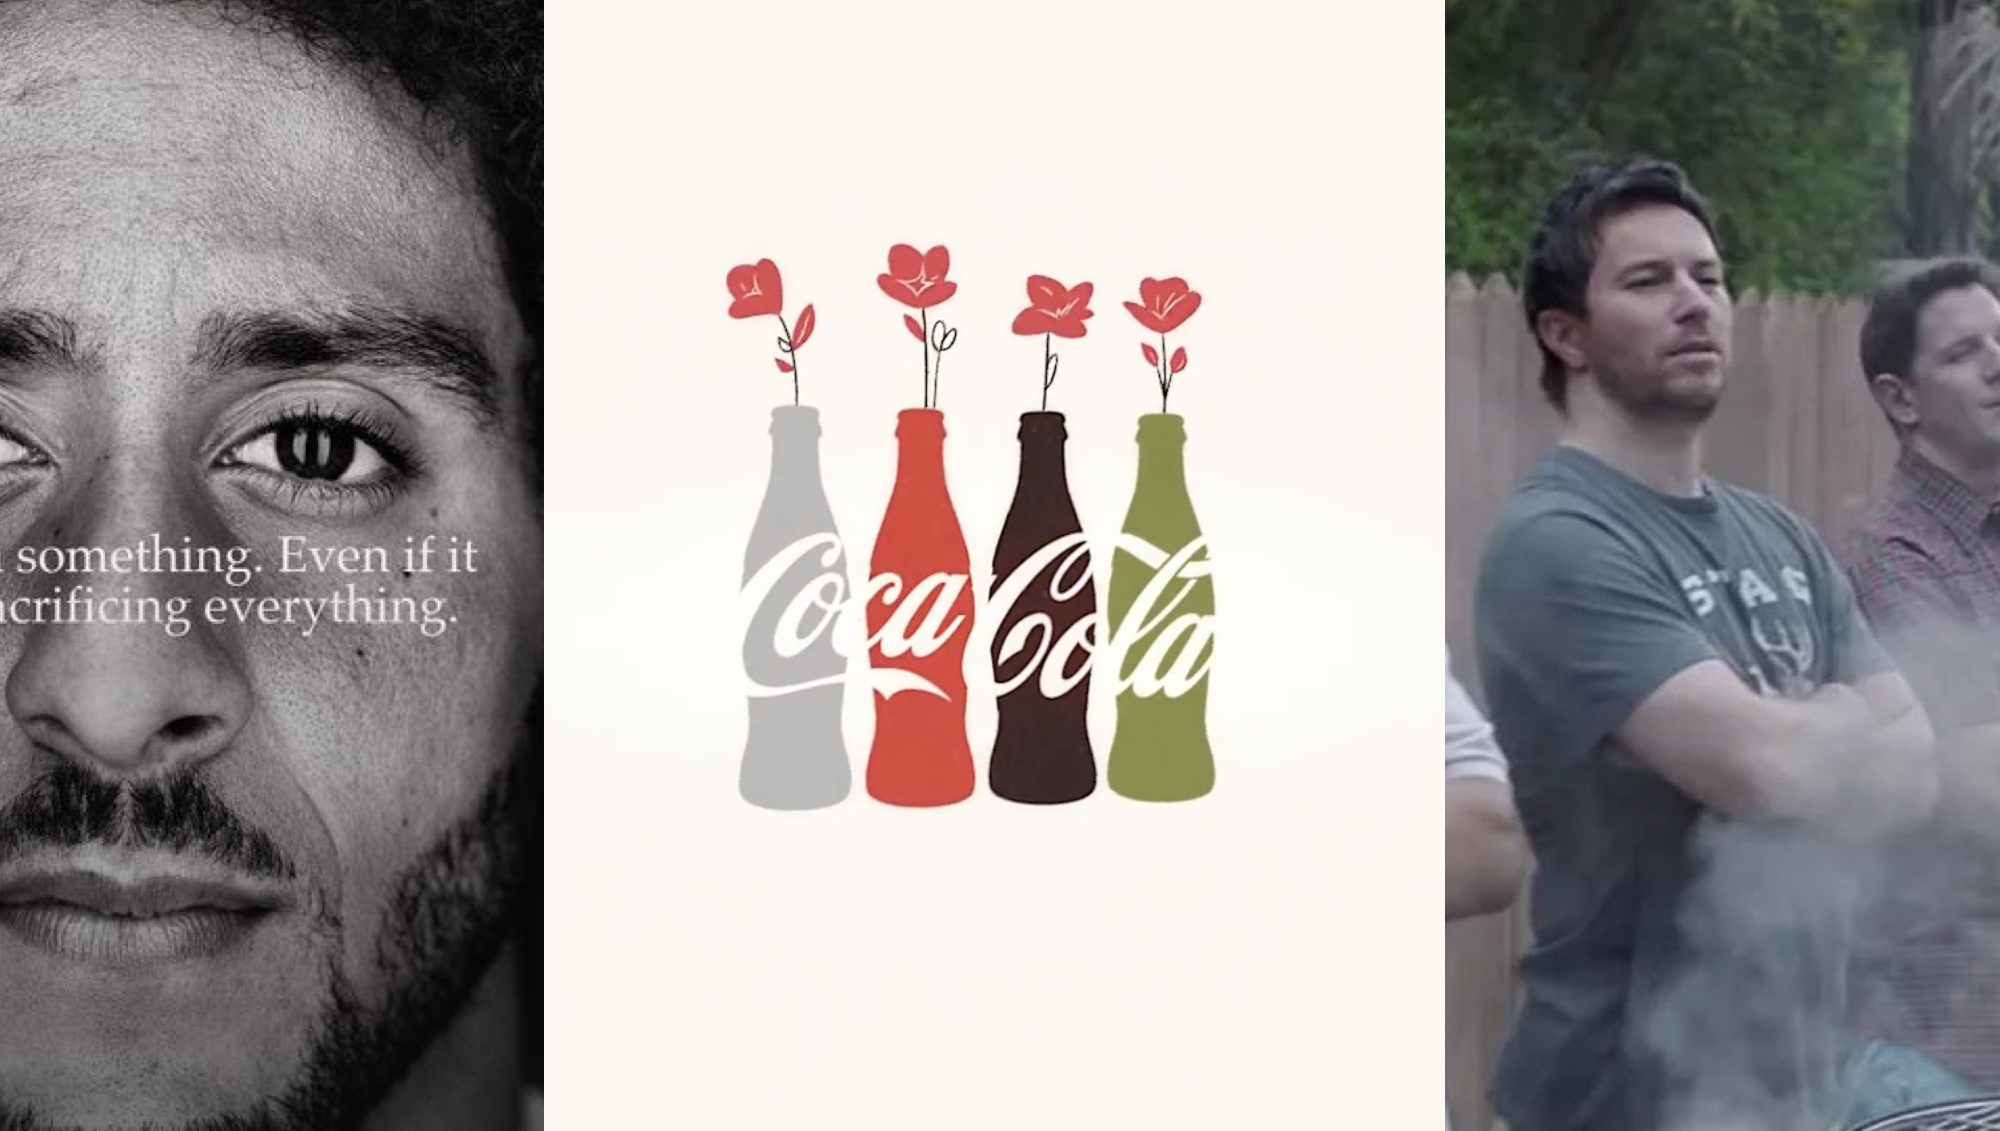 A side by side by side image of Colin Kaepernick, a Coca Cola ad, and three men barbecuing